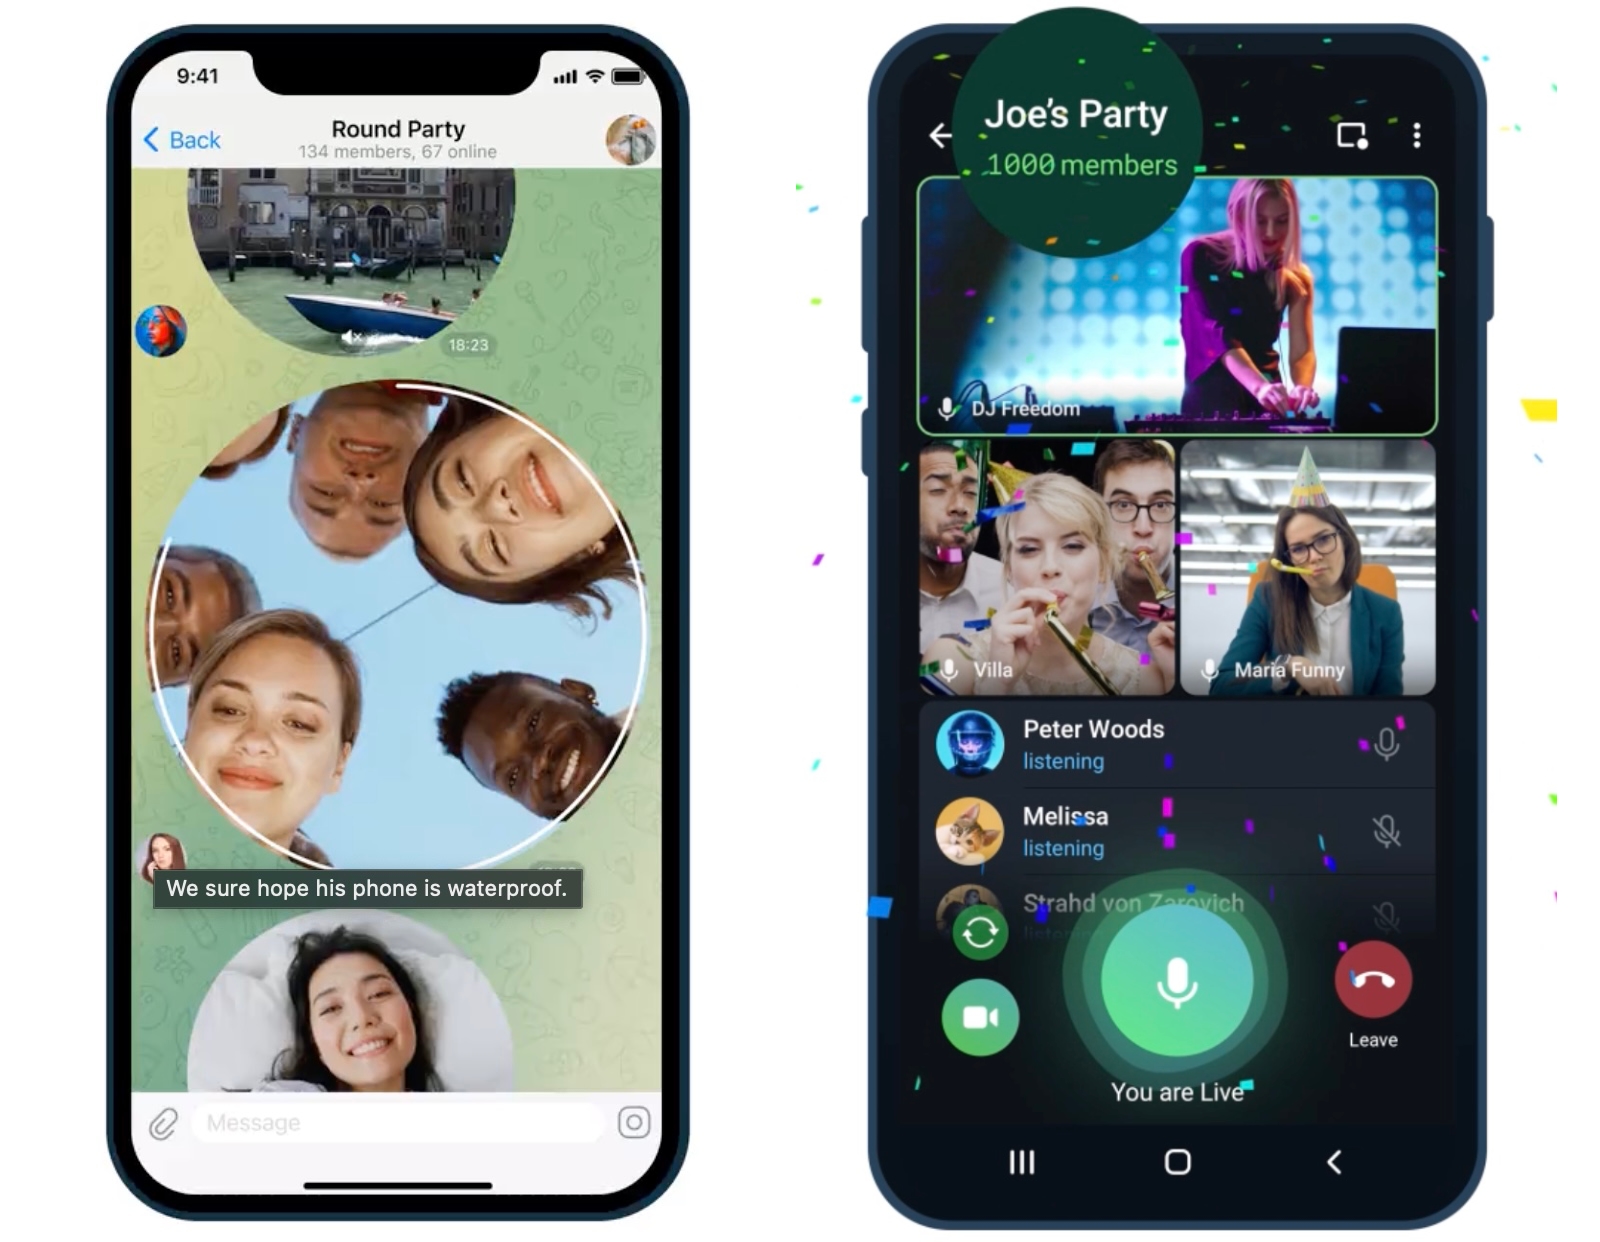 Bumper Telegram Update Enables Video Calls With Up to 1,000 Viewers |  MacRumors Forums